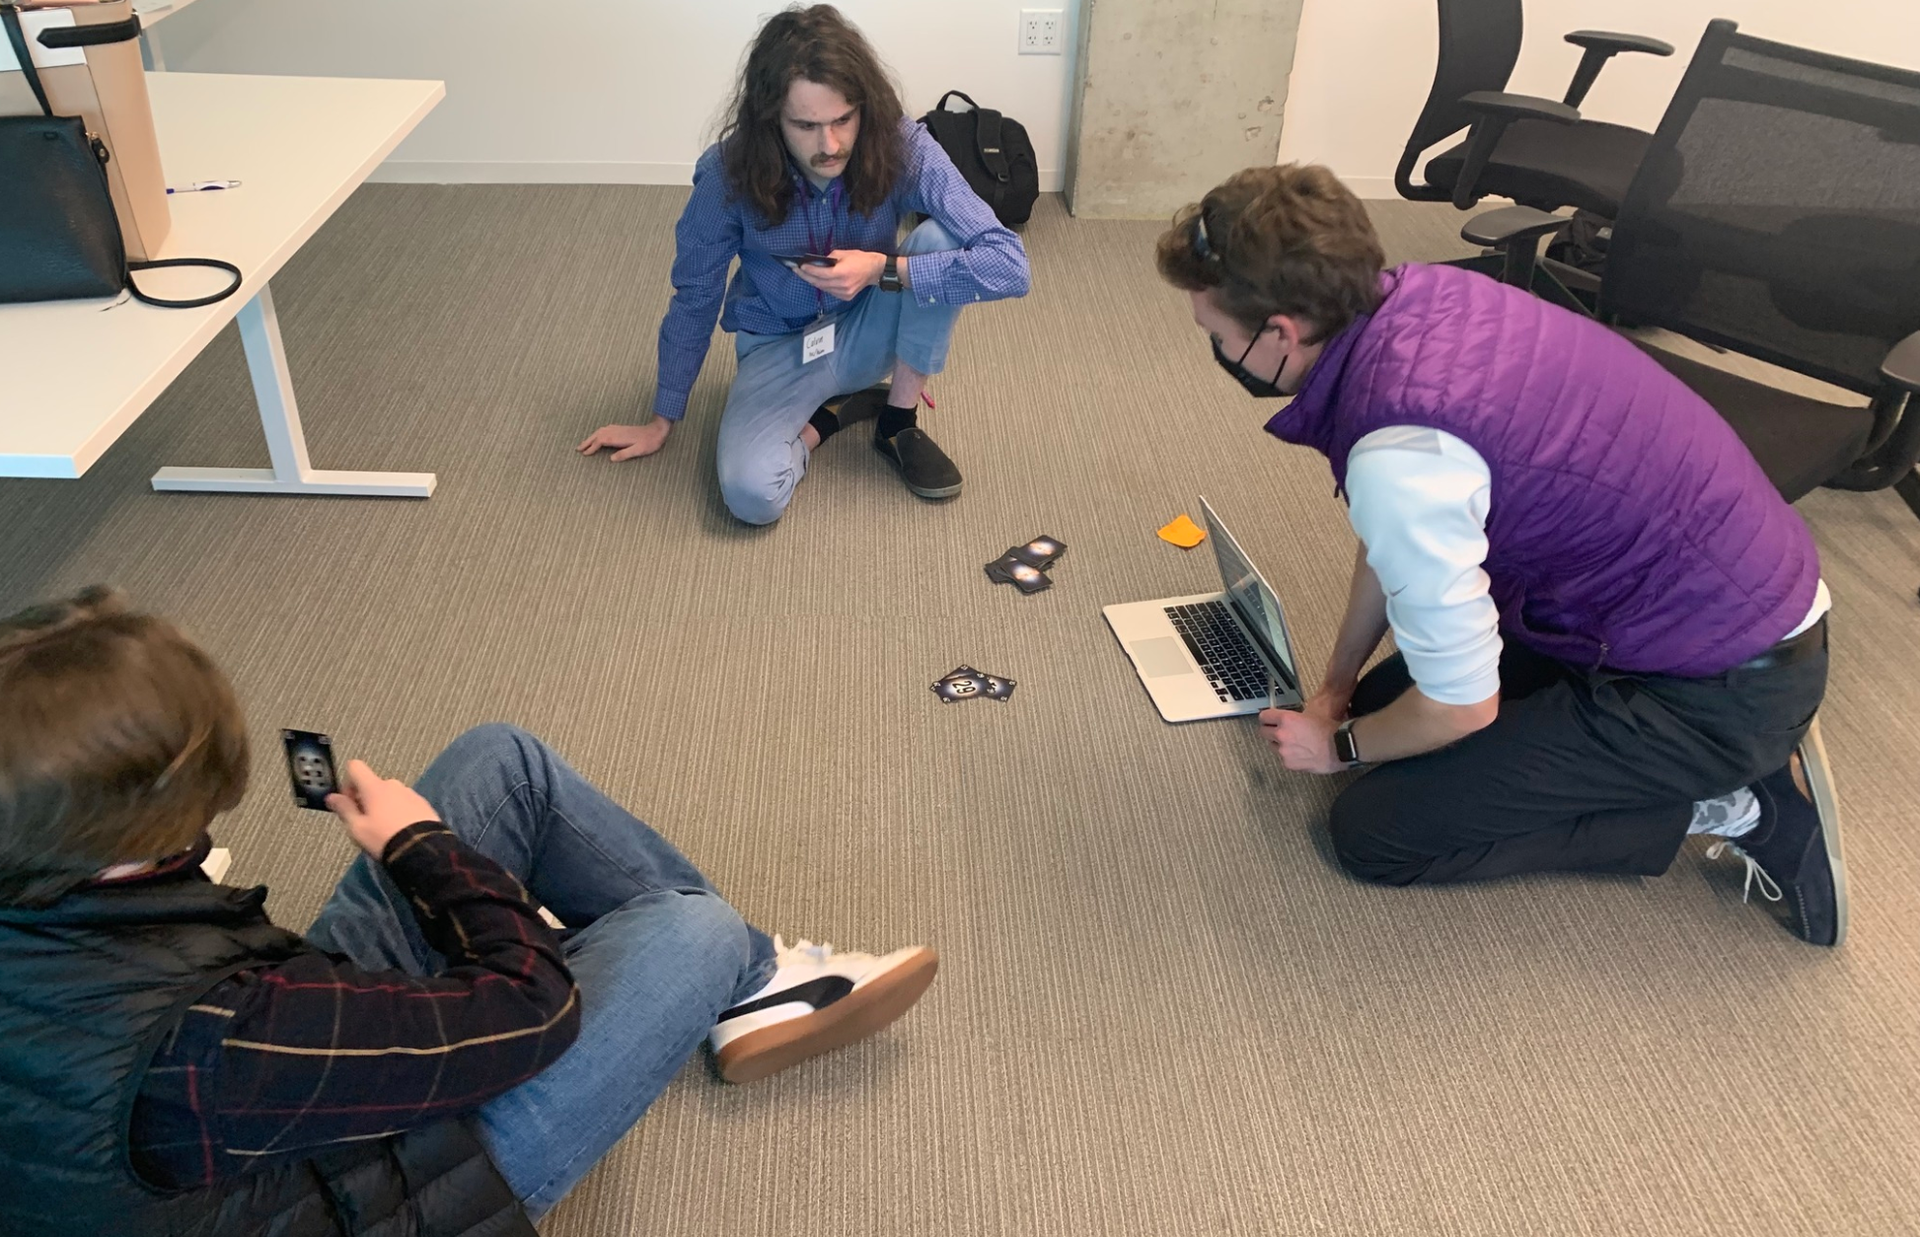 Image shows Game Genius moderator (in purple vest to the right) on the floor talking to two other interns that are seated near him.